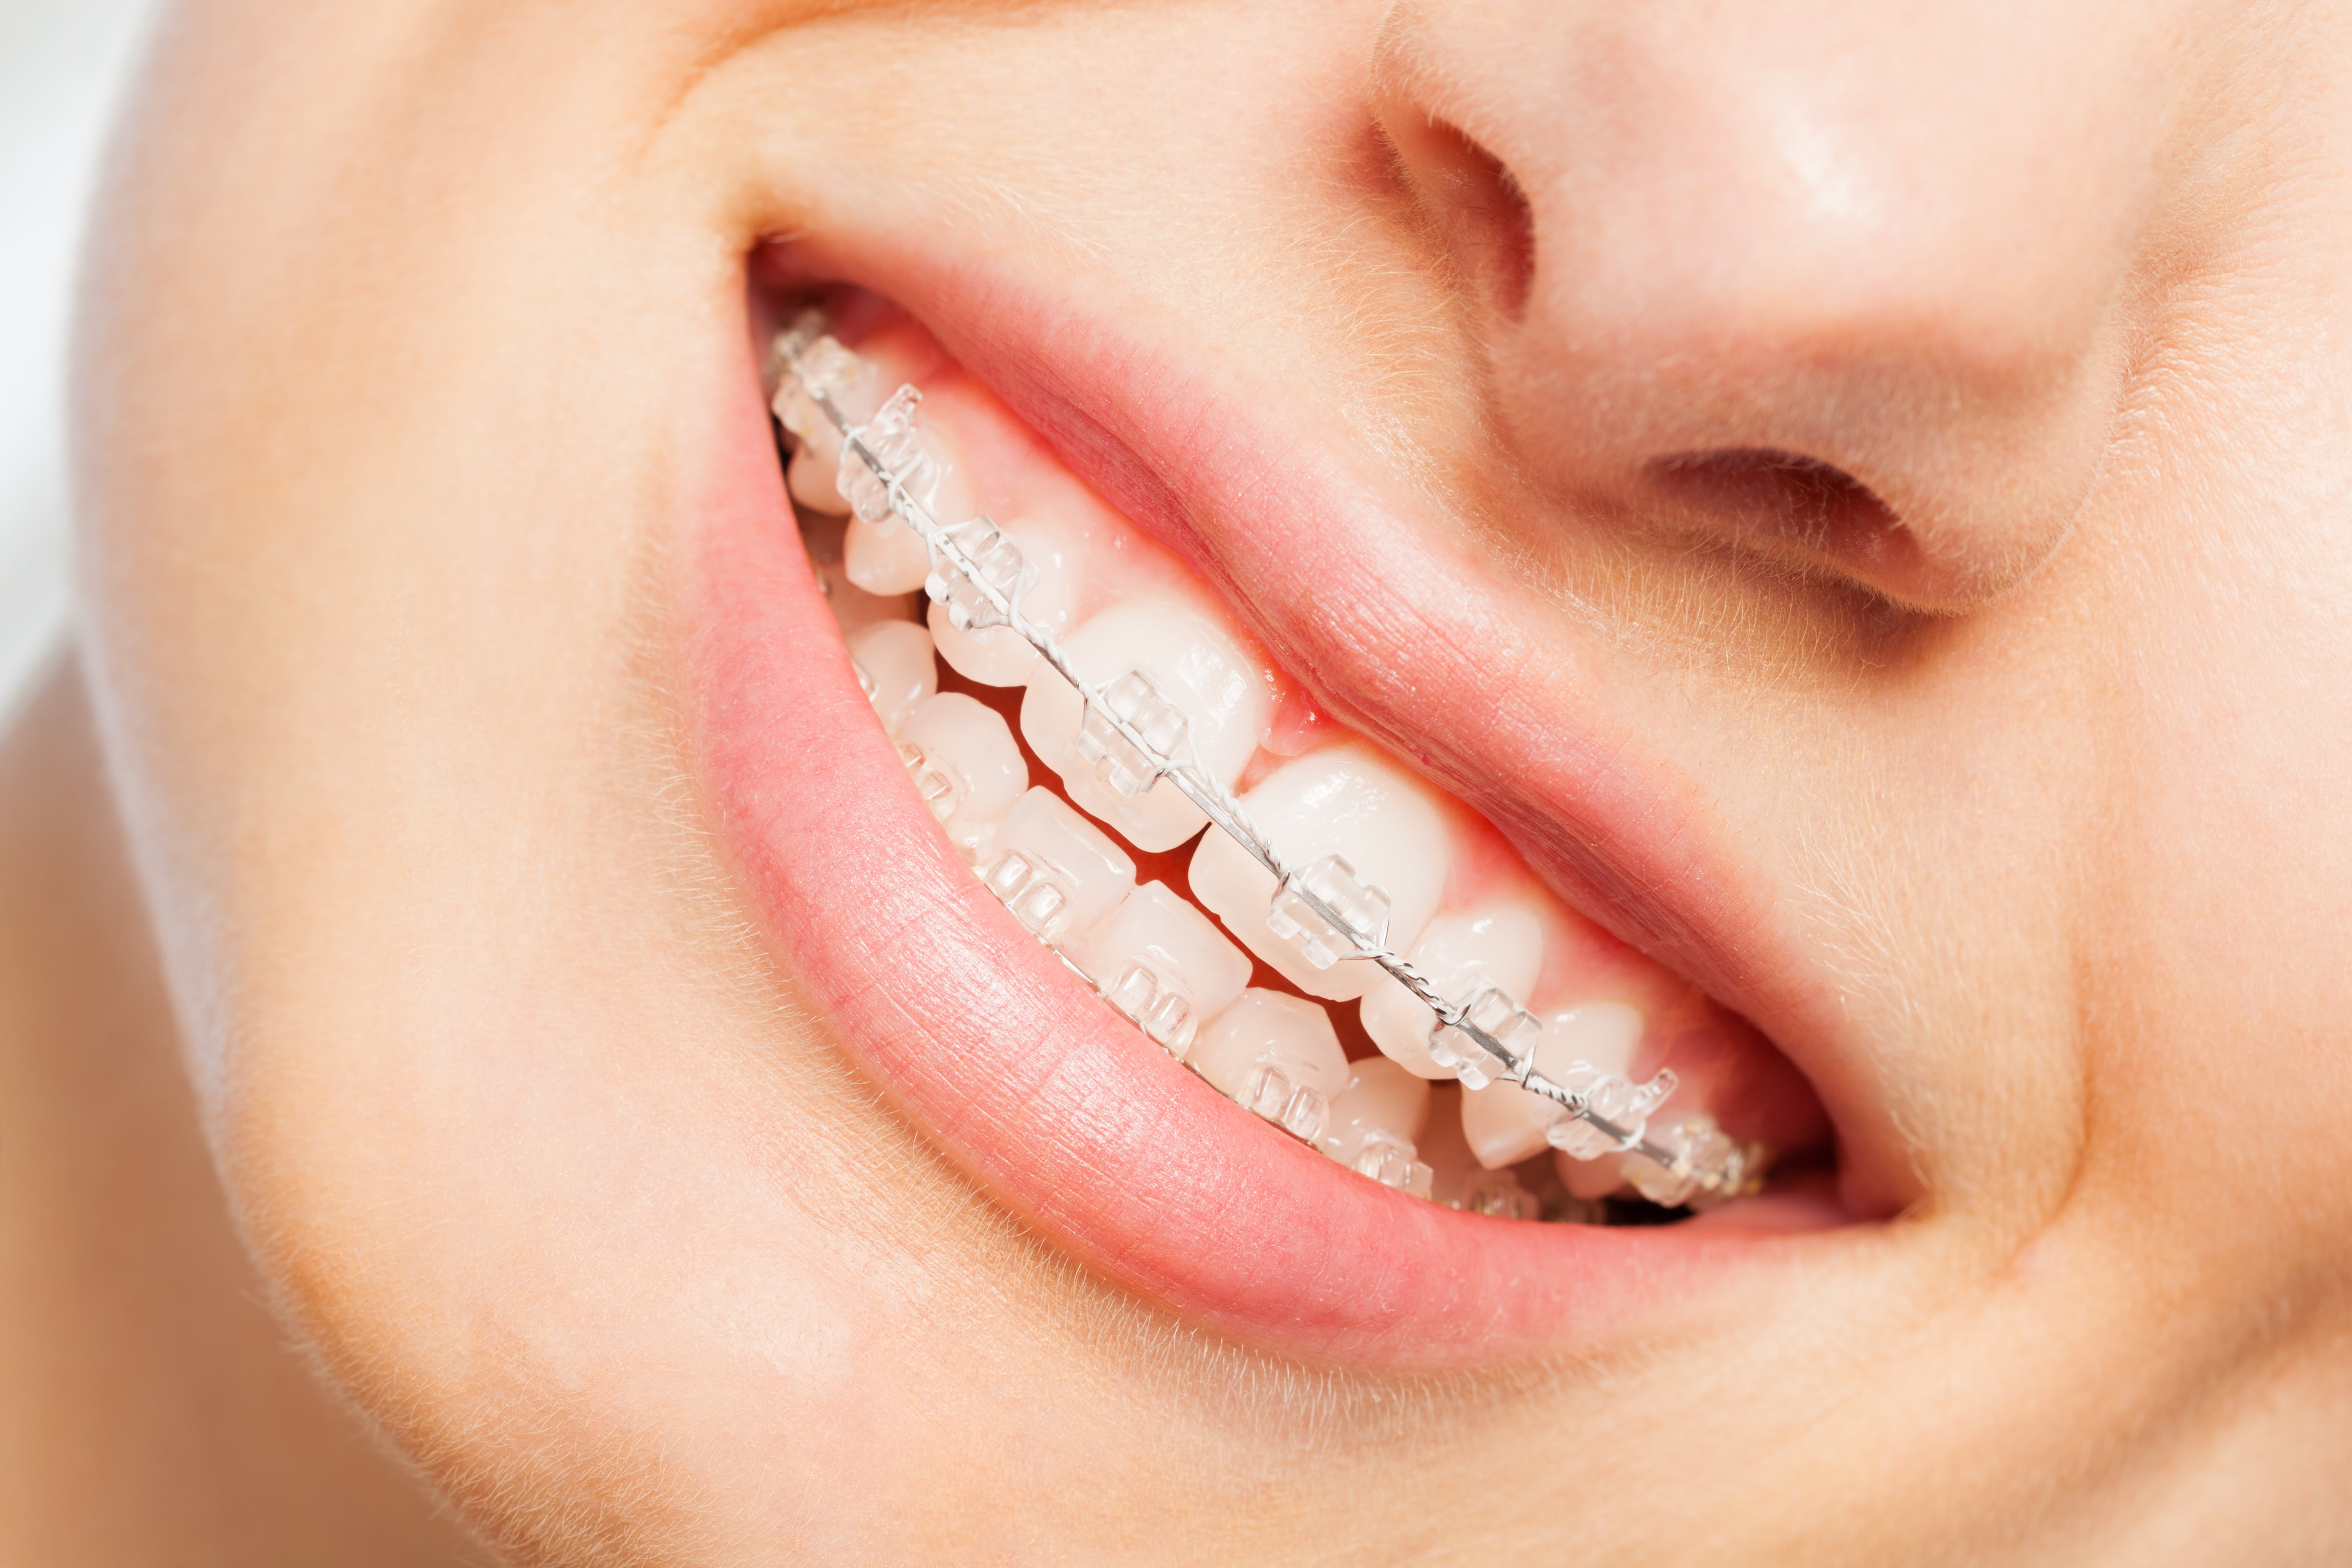 Teeth with traditional braces on them smiling at the camera showing braces for teens.